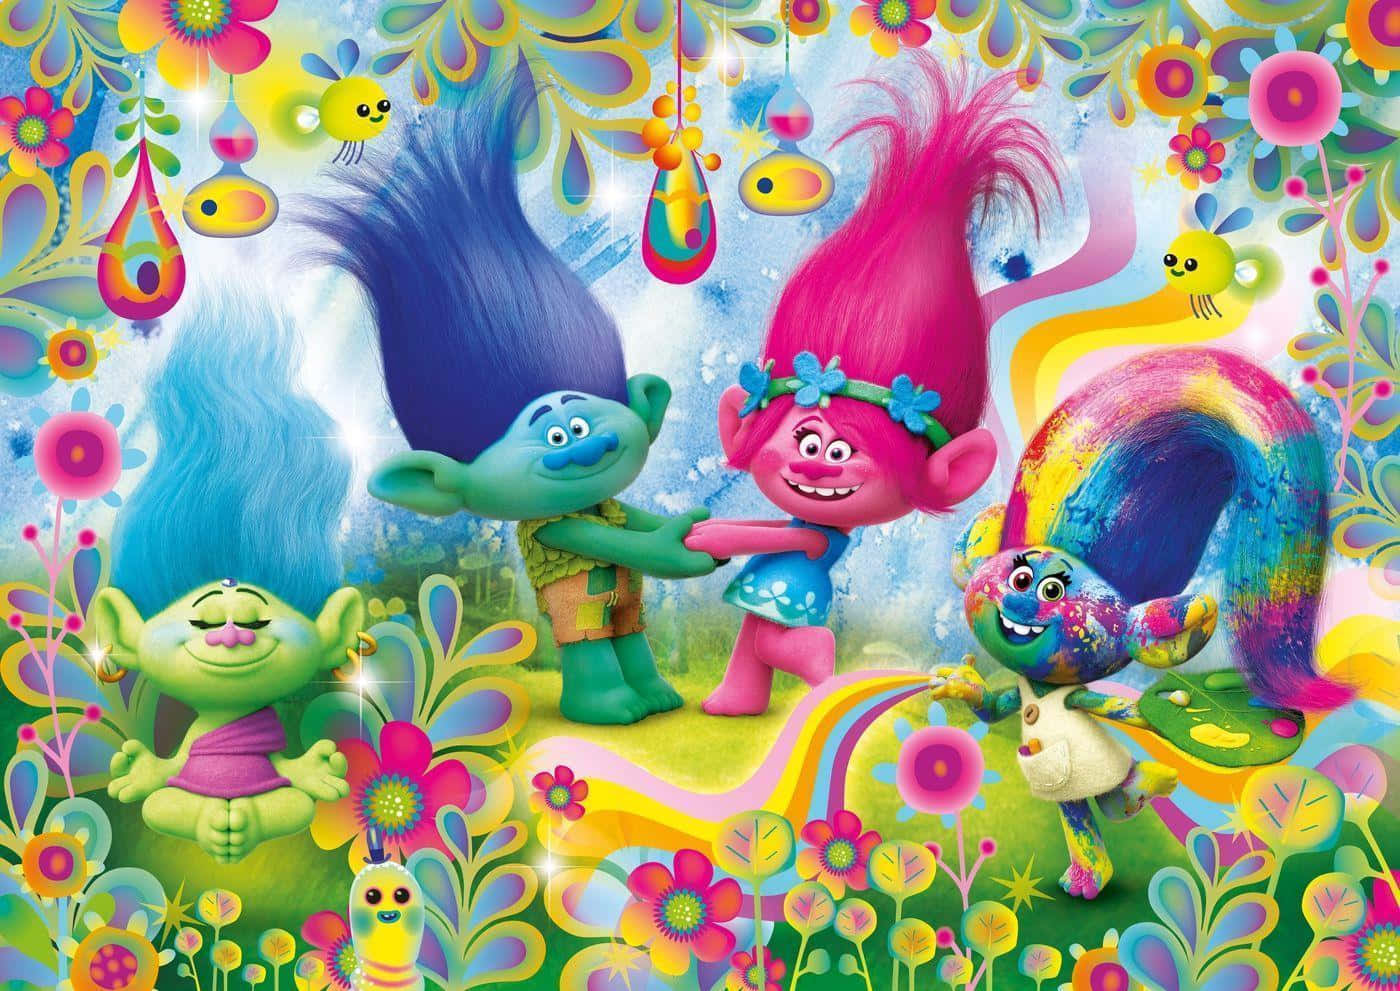 Enjoy The Beauty of The Colorful Trolls